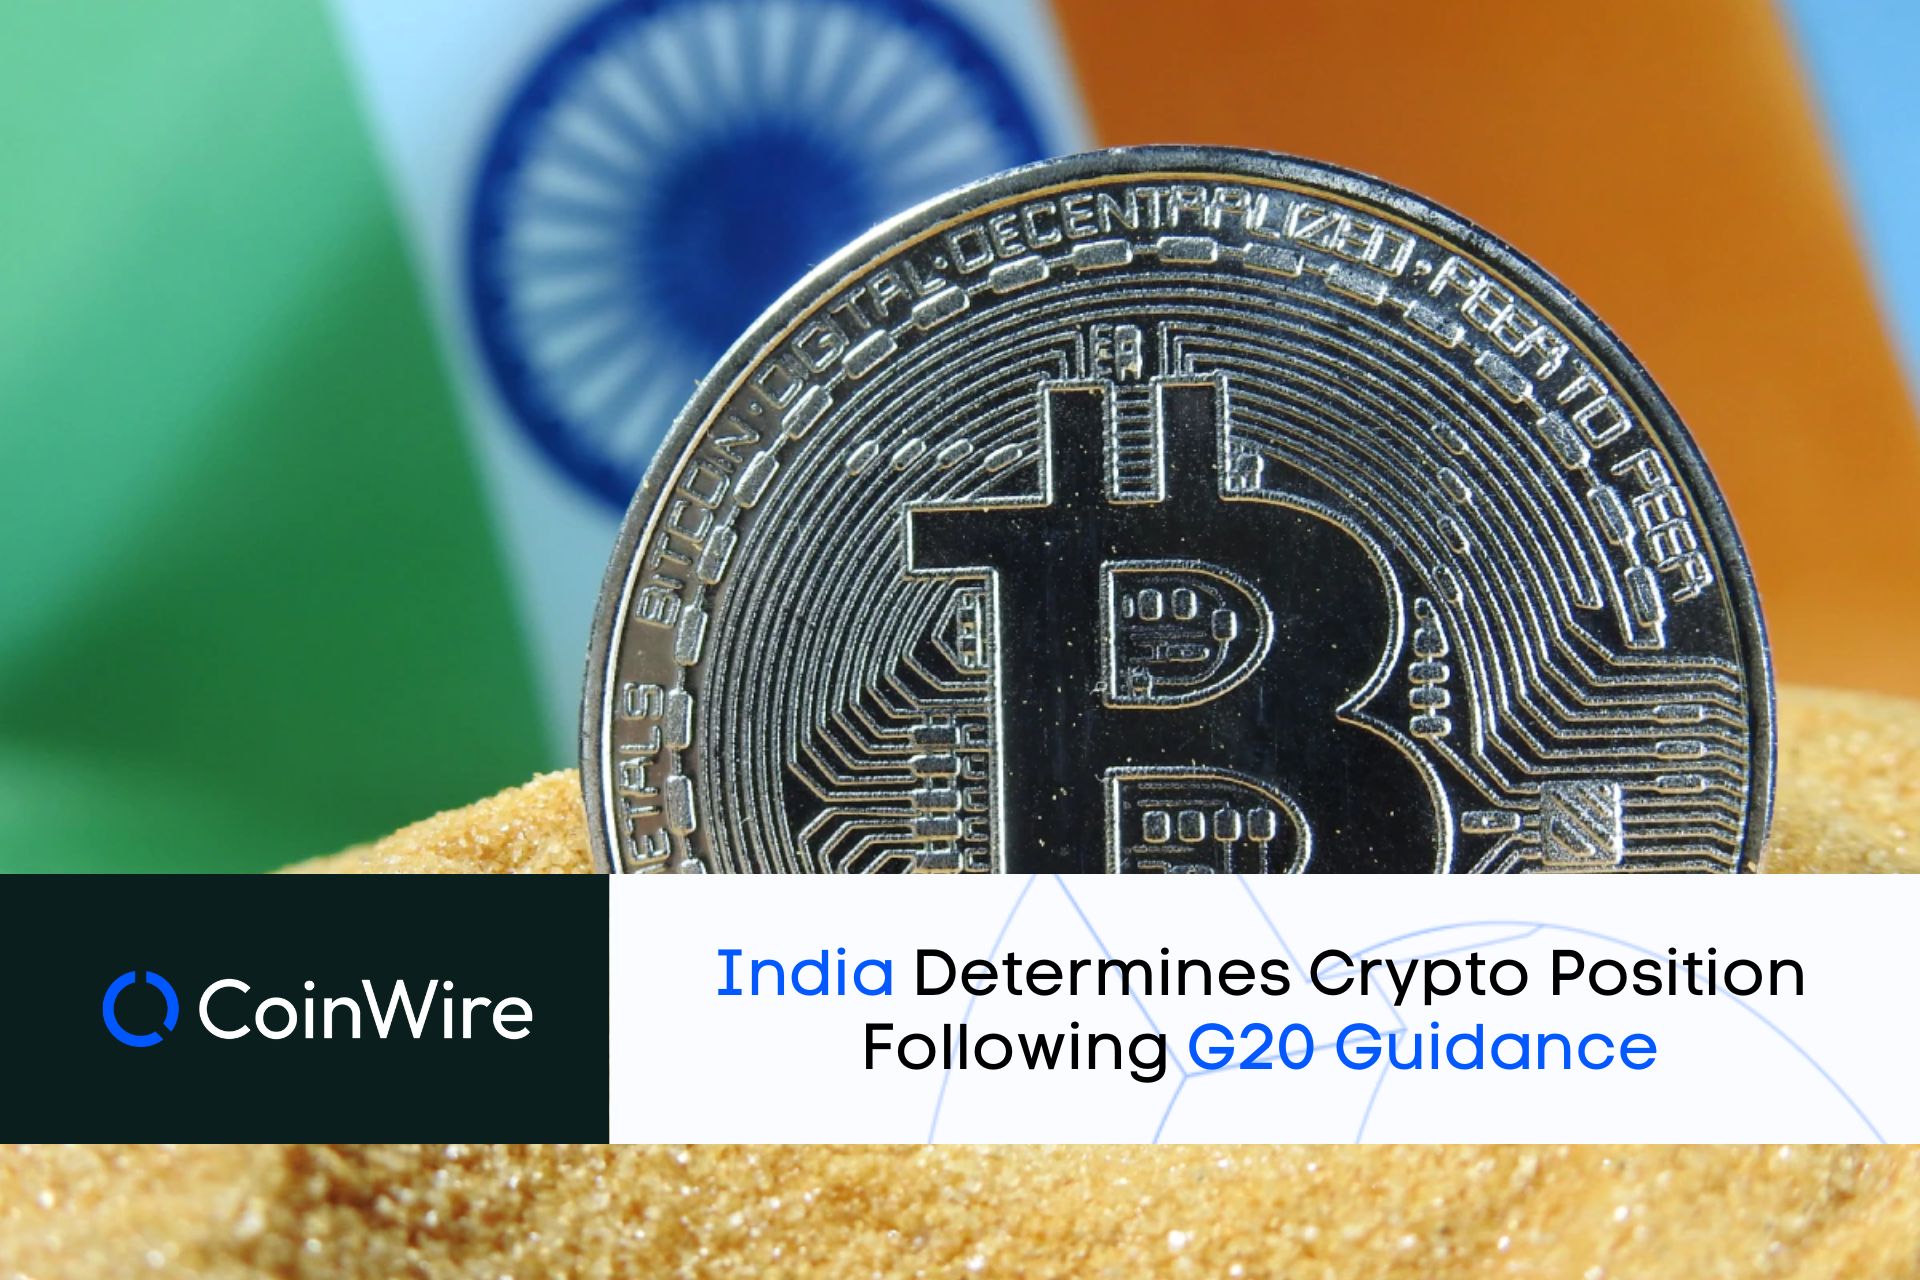 India Determines Crypto Position Following G20 Guidance